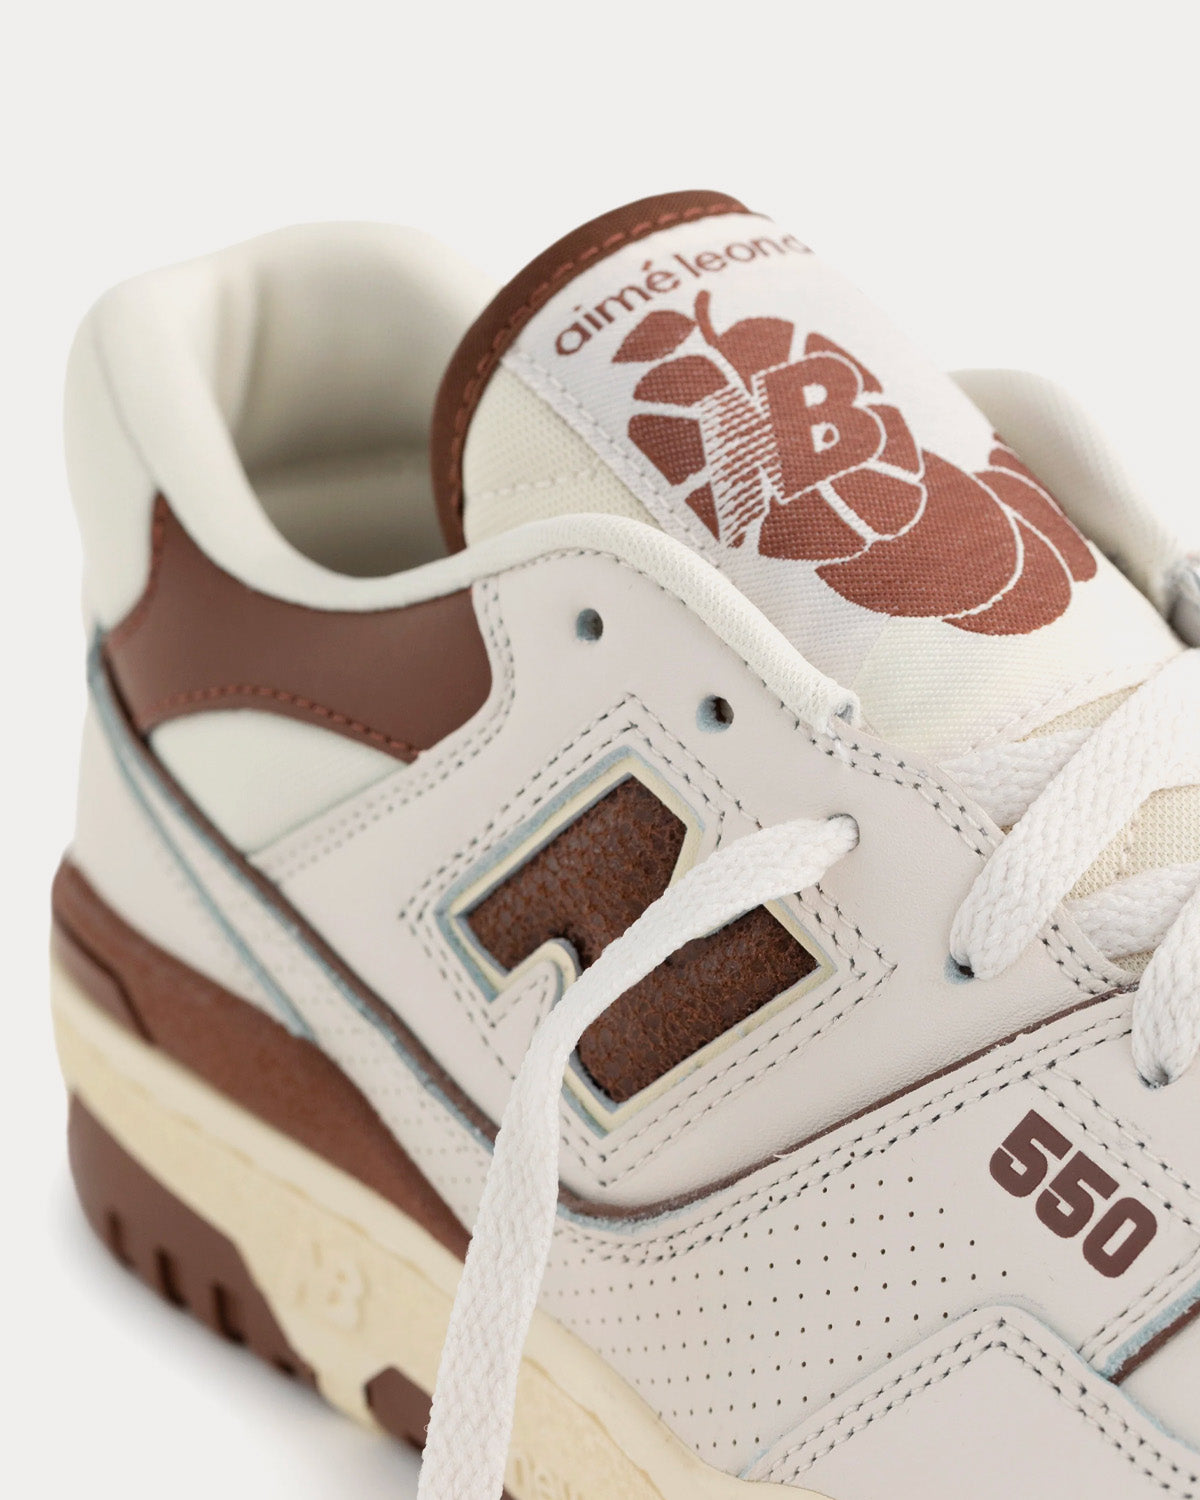 New Balance x Aime Leon Dore P550 Basketball Oxfords Brown Low Top Sneakers  - Sneak in Peace